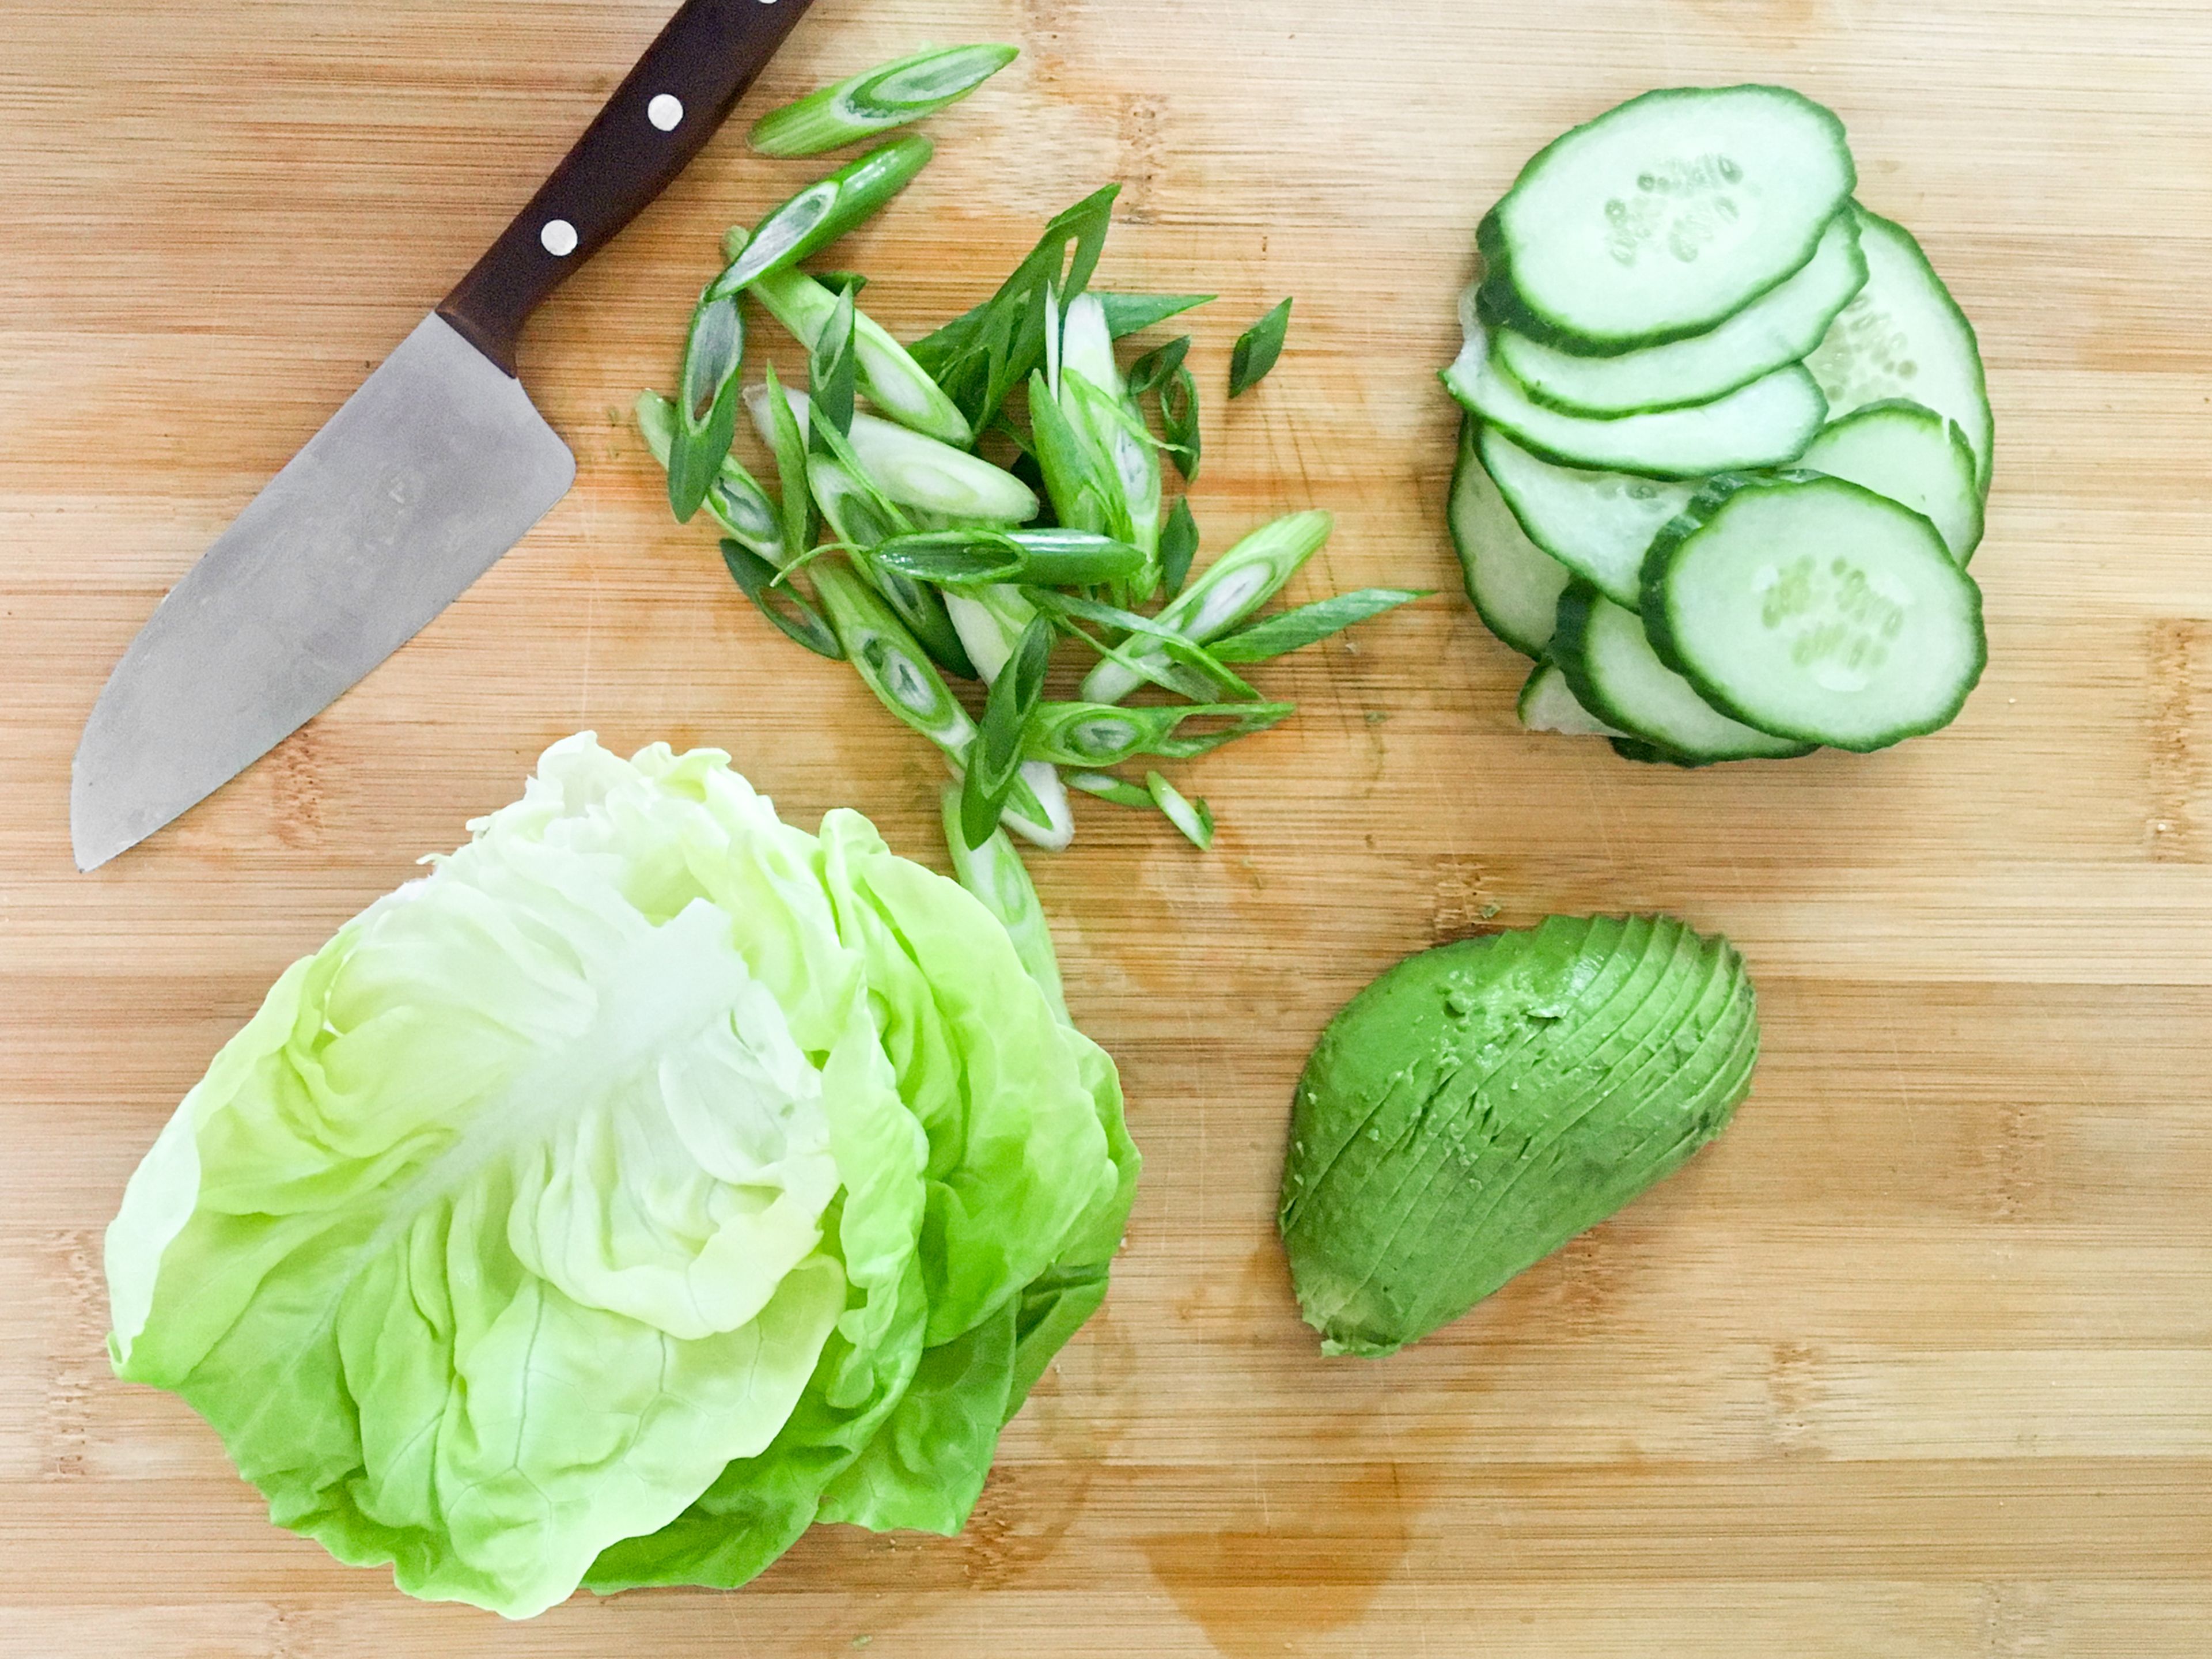 Cut the cucumber into slices. Wash the salad and pluck into large pieces. Halve avocado, remove core and take out pulp with a spoon. Then cut into slices. Cut scallion into rings.